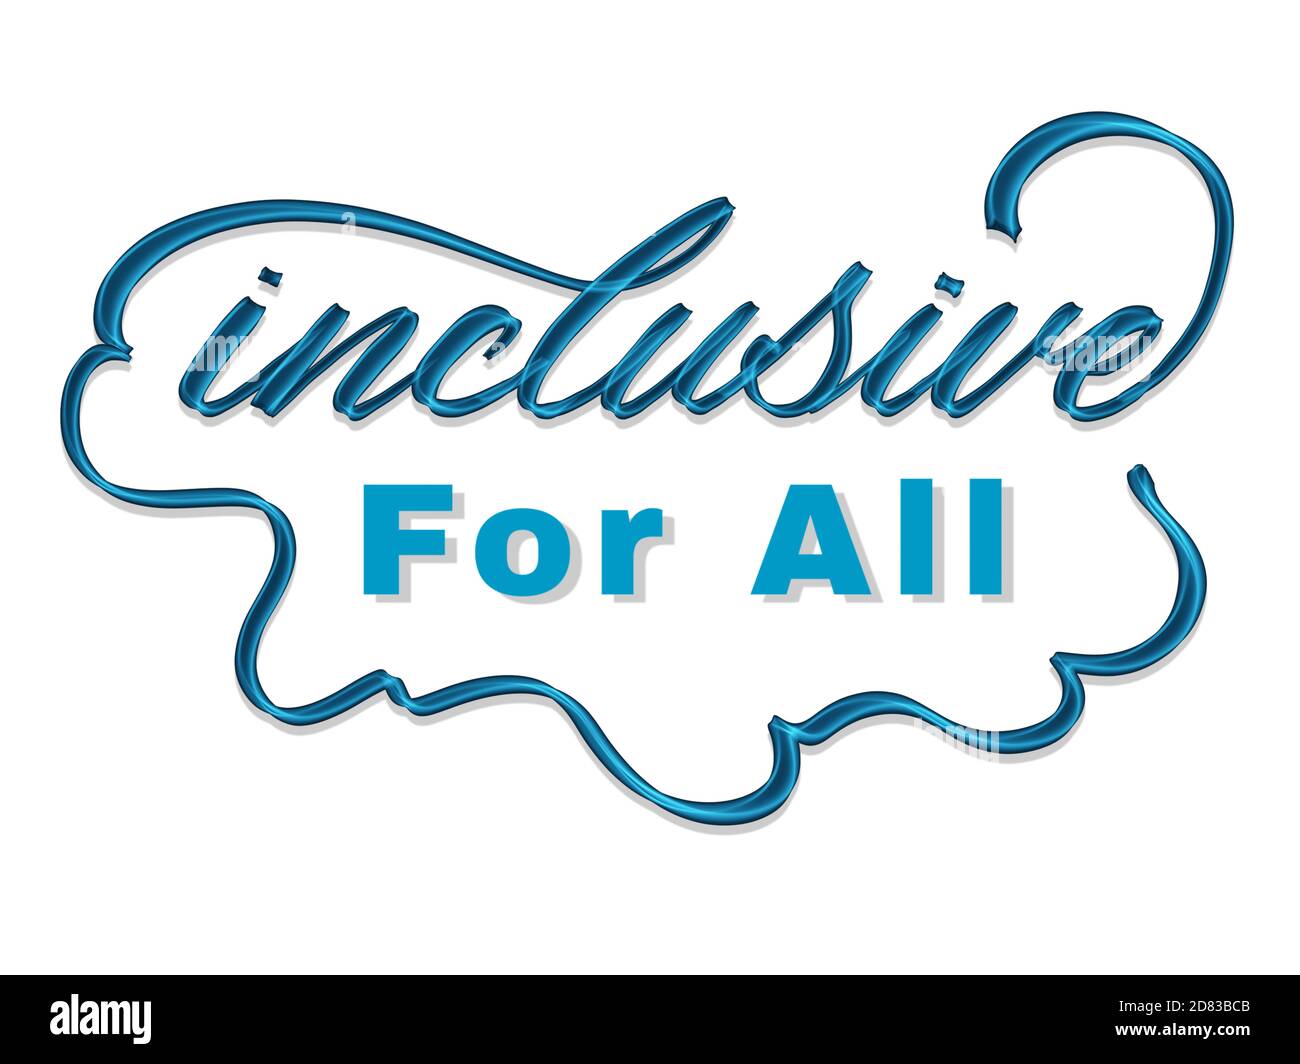 Inclusive For All - hand lettering design about trend of making products accessible for everybody Stock Photo